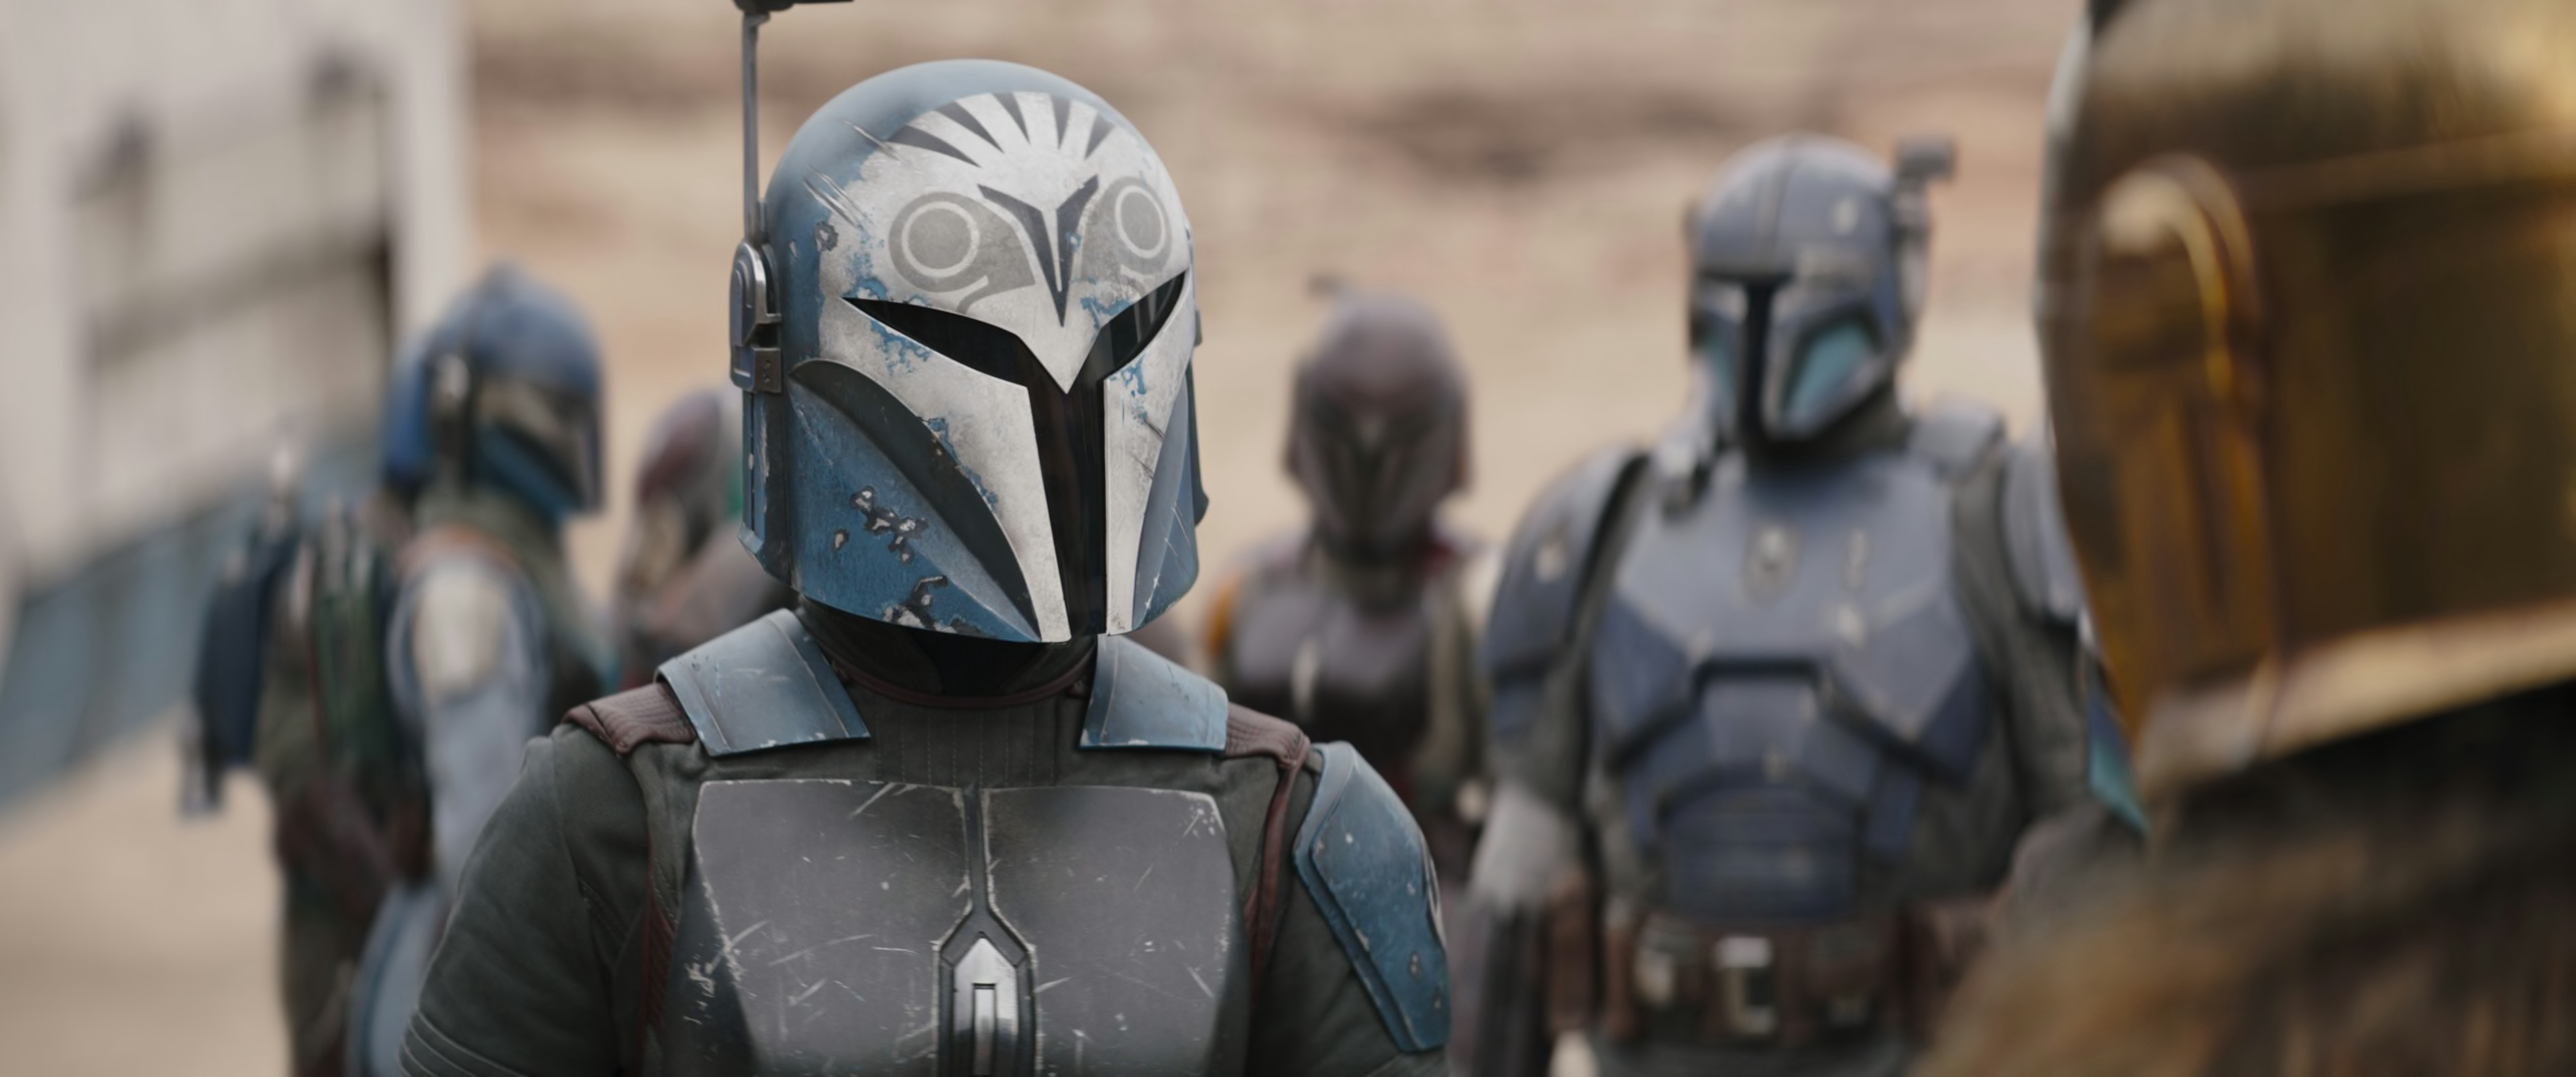 Grogu's New Mandalorian Armor: What The Rondel The Armorer Gives Him Is